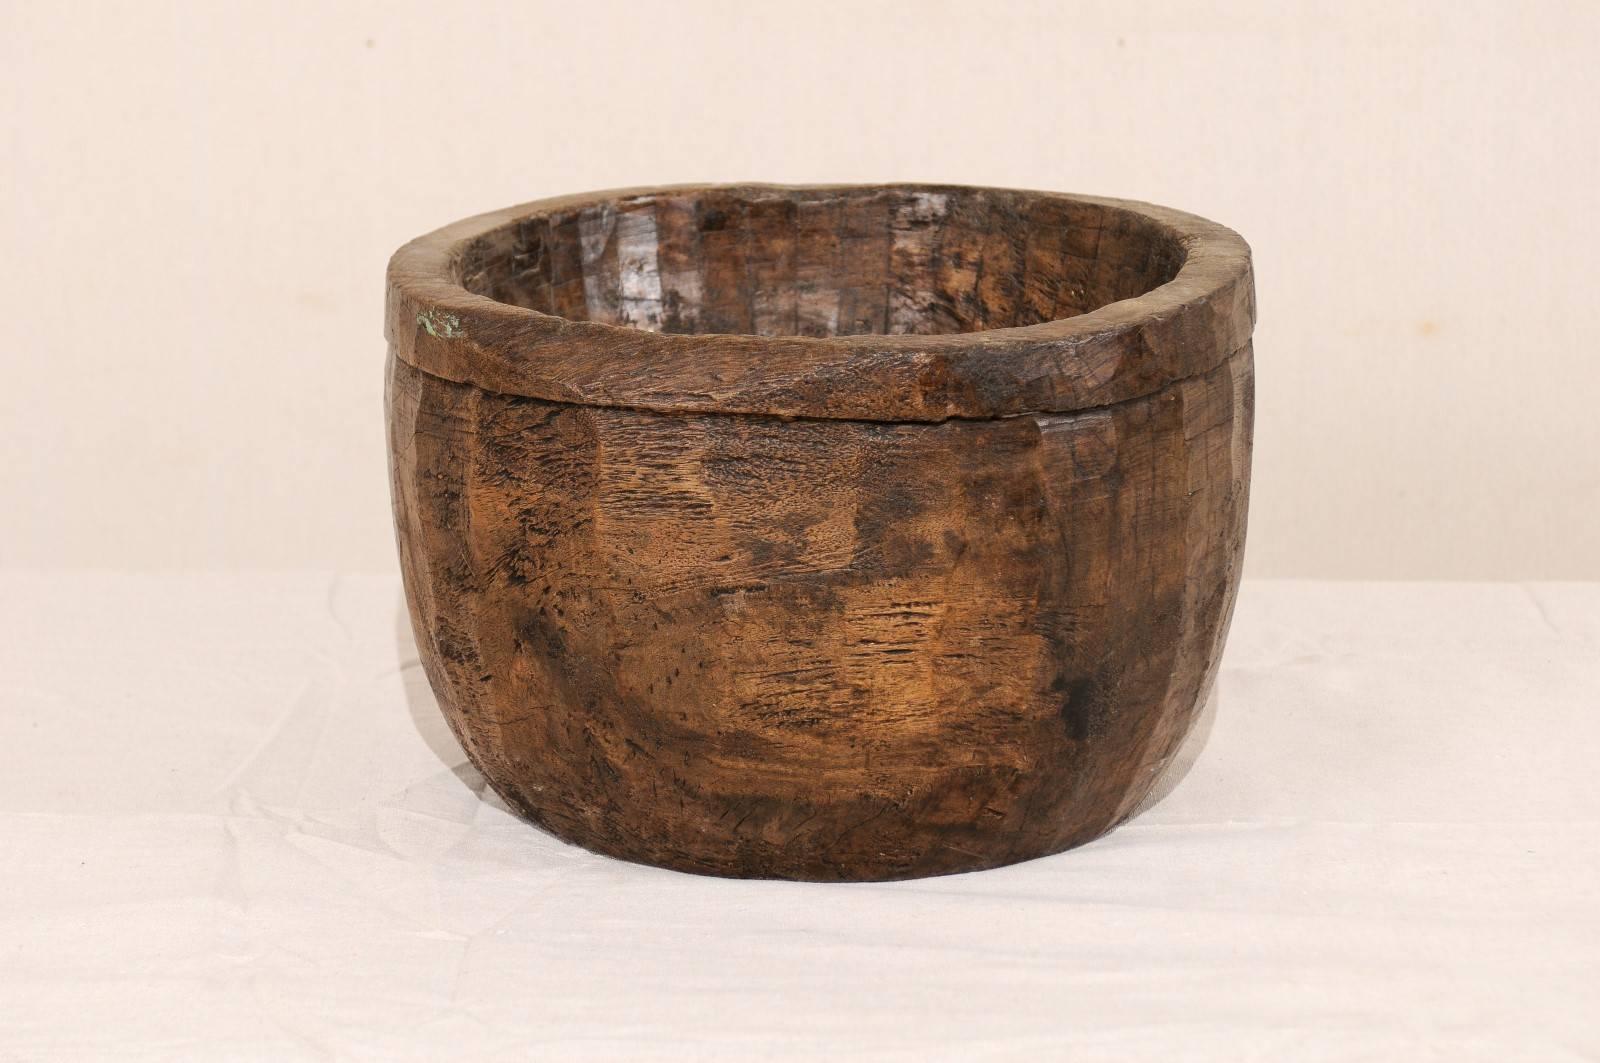 A vintage Naga wood bowl. This beautifully Primitive style bowl has been carved from a single piece of wood. These bowls were originally used in kitchens of the Naga people for various food oriented activities including storing and cooking. The Naga